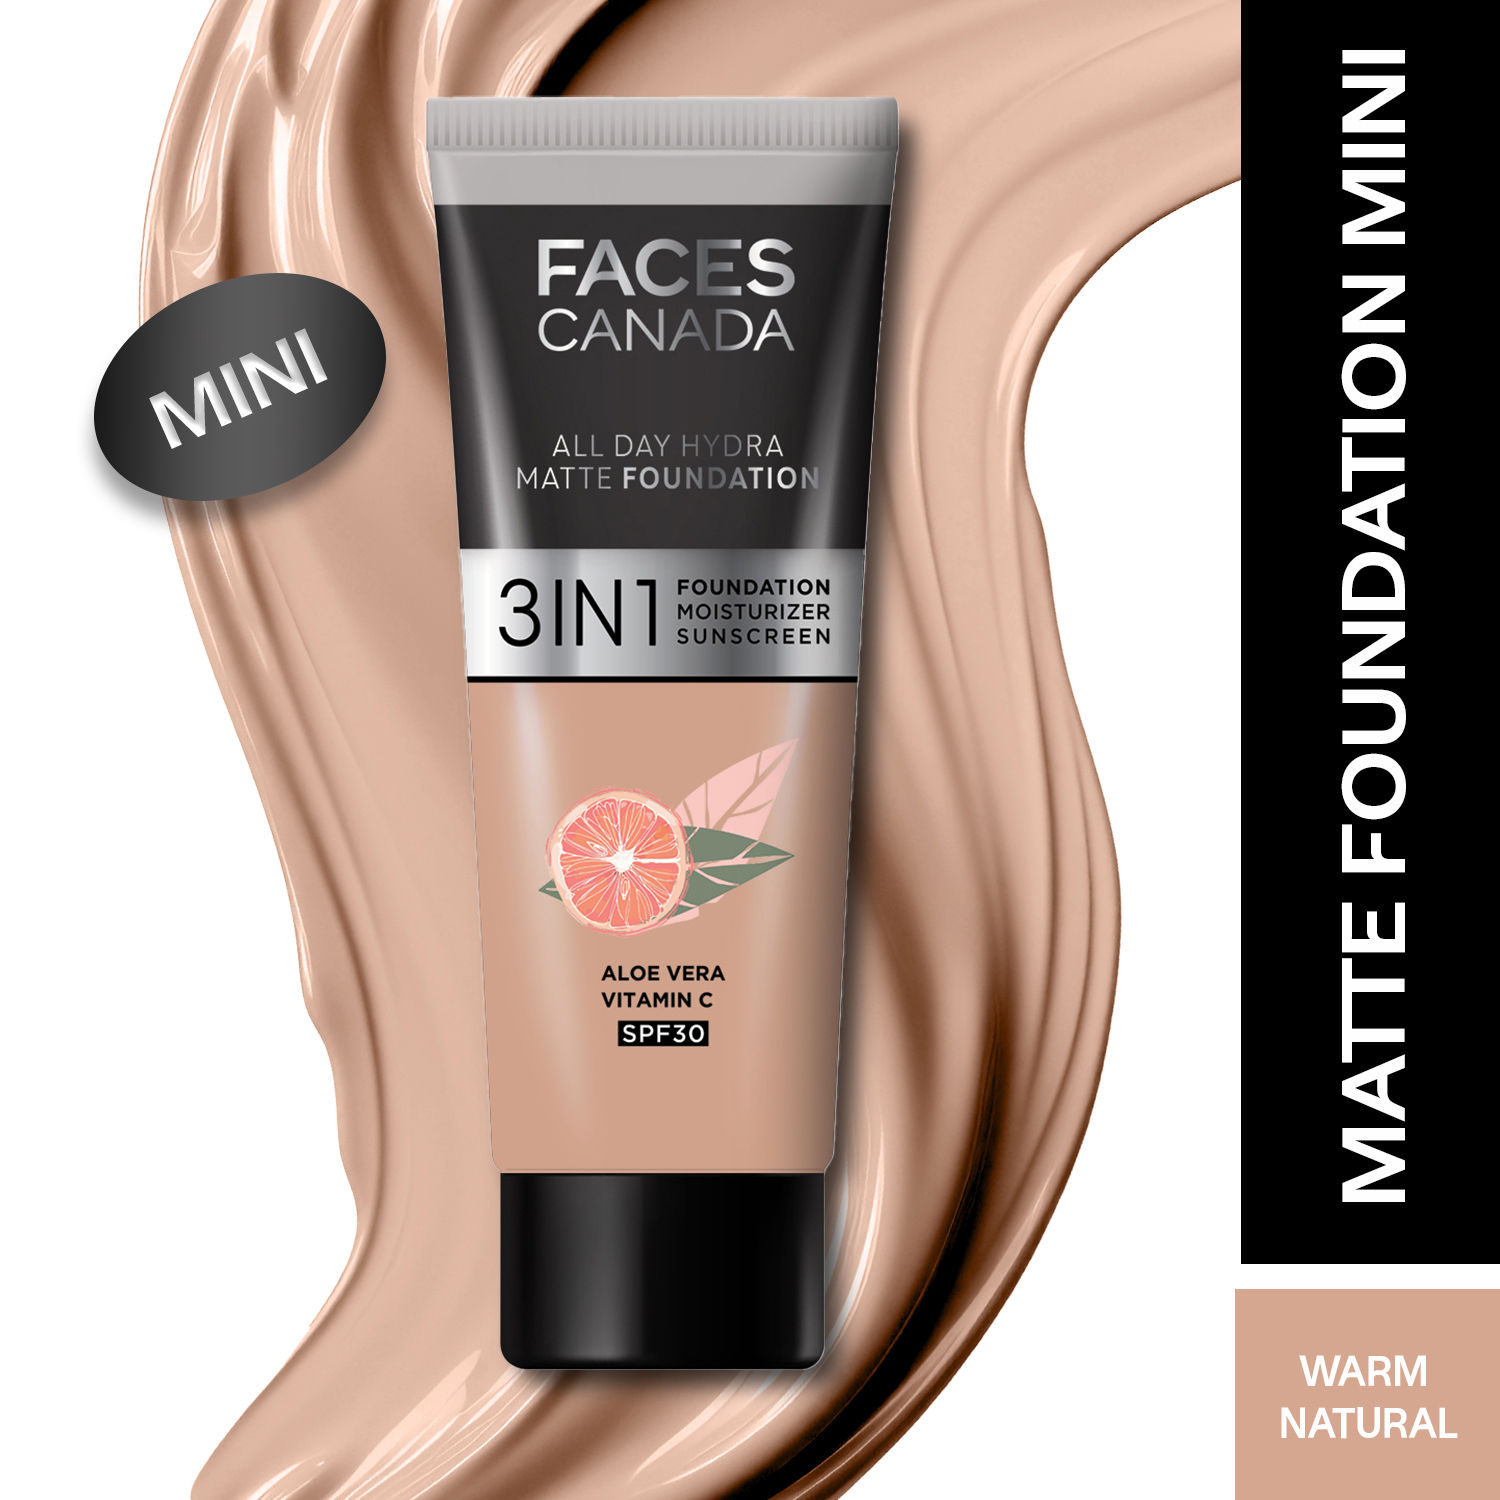 FACES CANADA All Day Hydra Matte Foundation Warm Natural 021 15ml | SPF 30  | 24HR Hydration | Aloe Hydration | Oil-Free Matte | Vit C | Paraben Free 